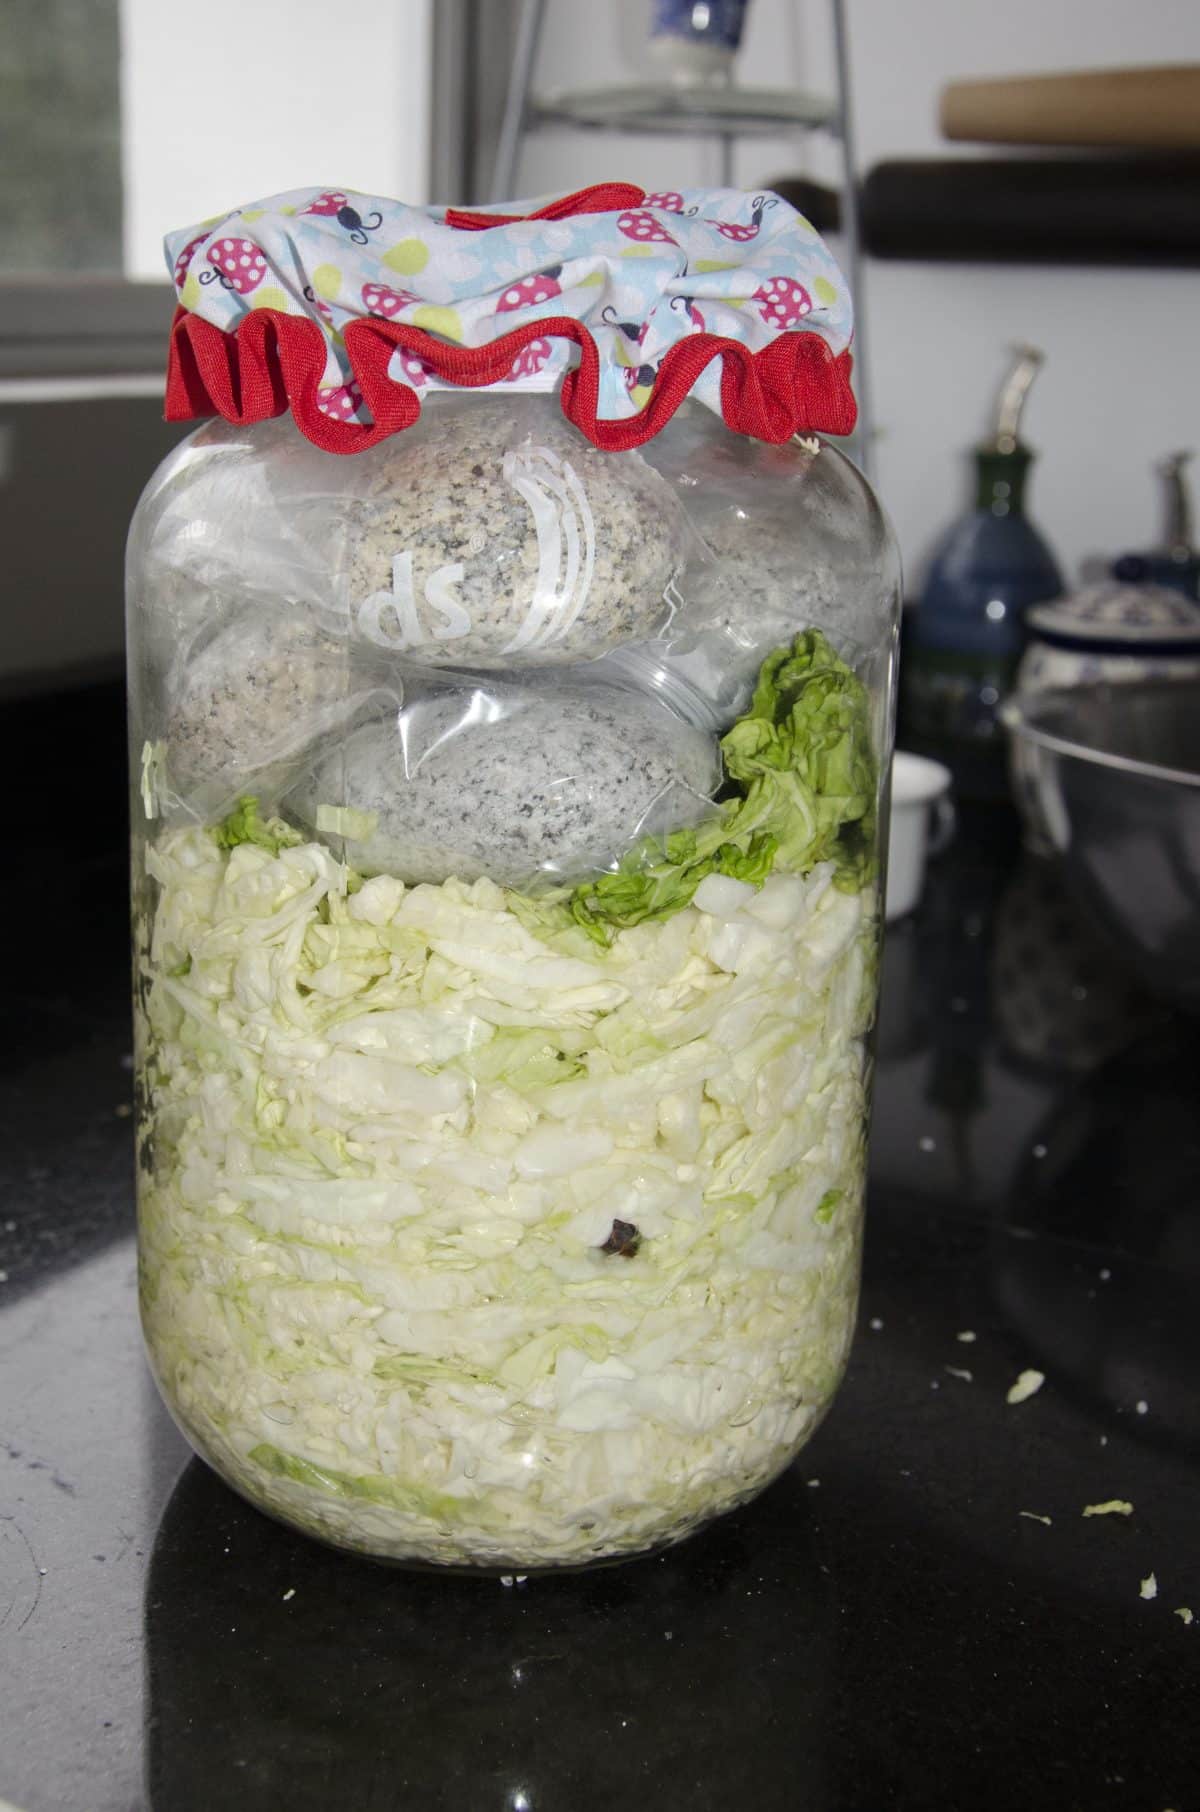 The rocks (in a plastic bag) added as a weight. Notice how much the cabbage has compressed.